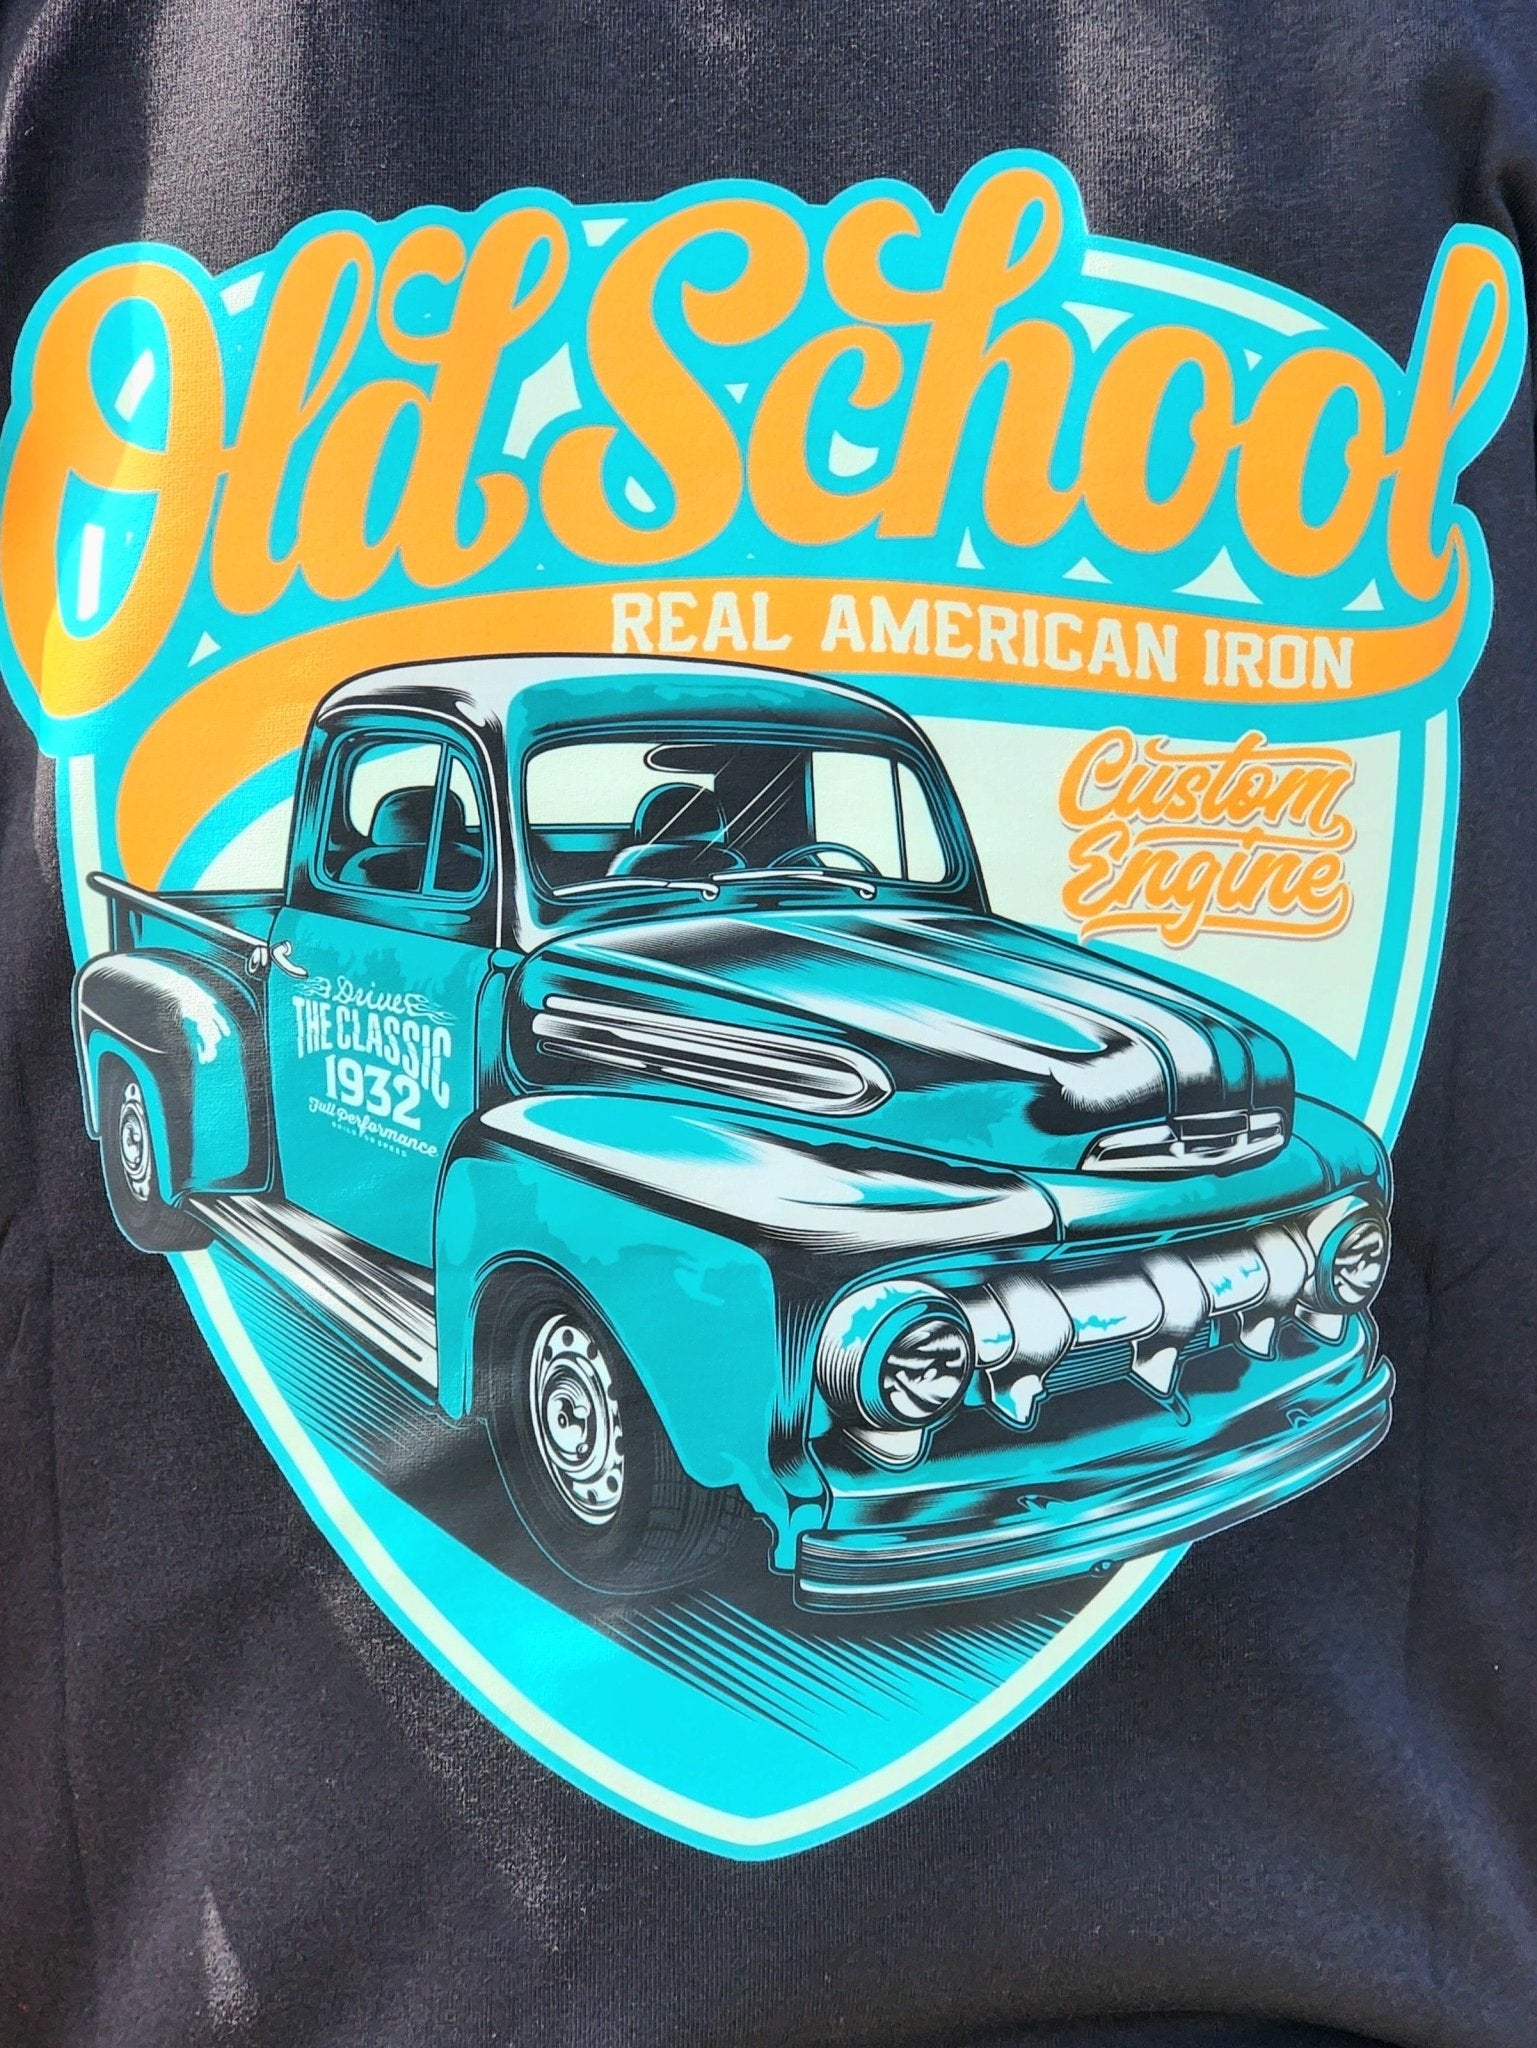 Old School T-shirt - Highway 26 Clothing